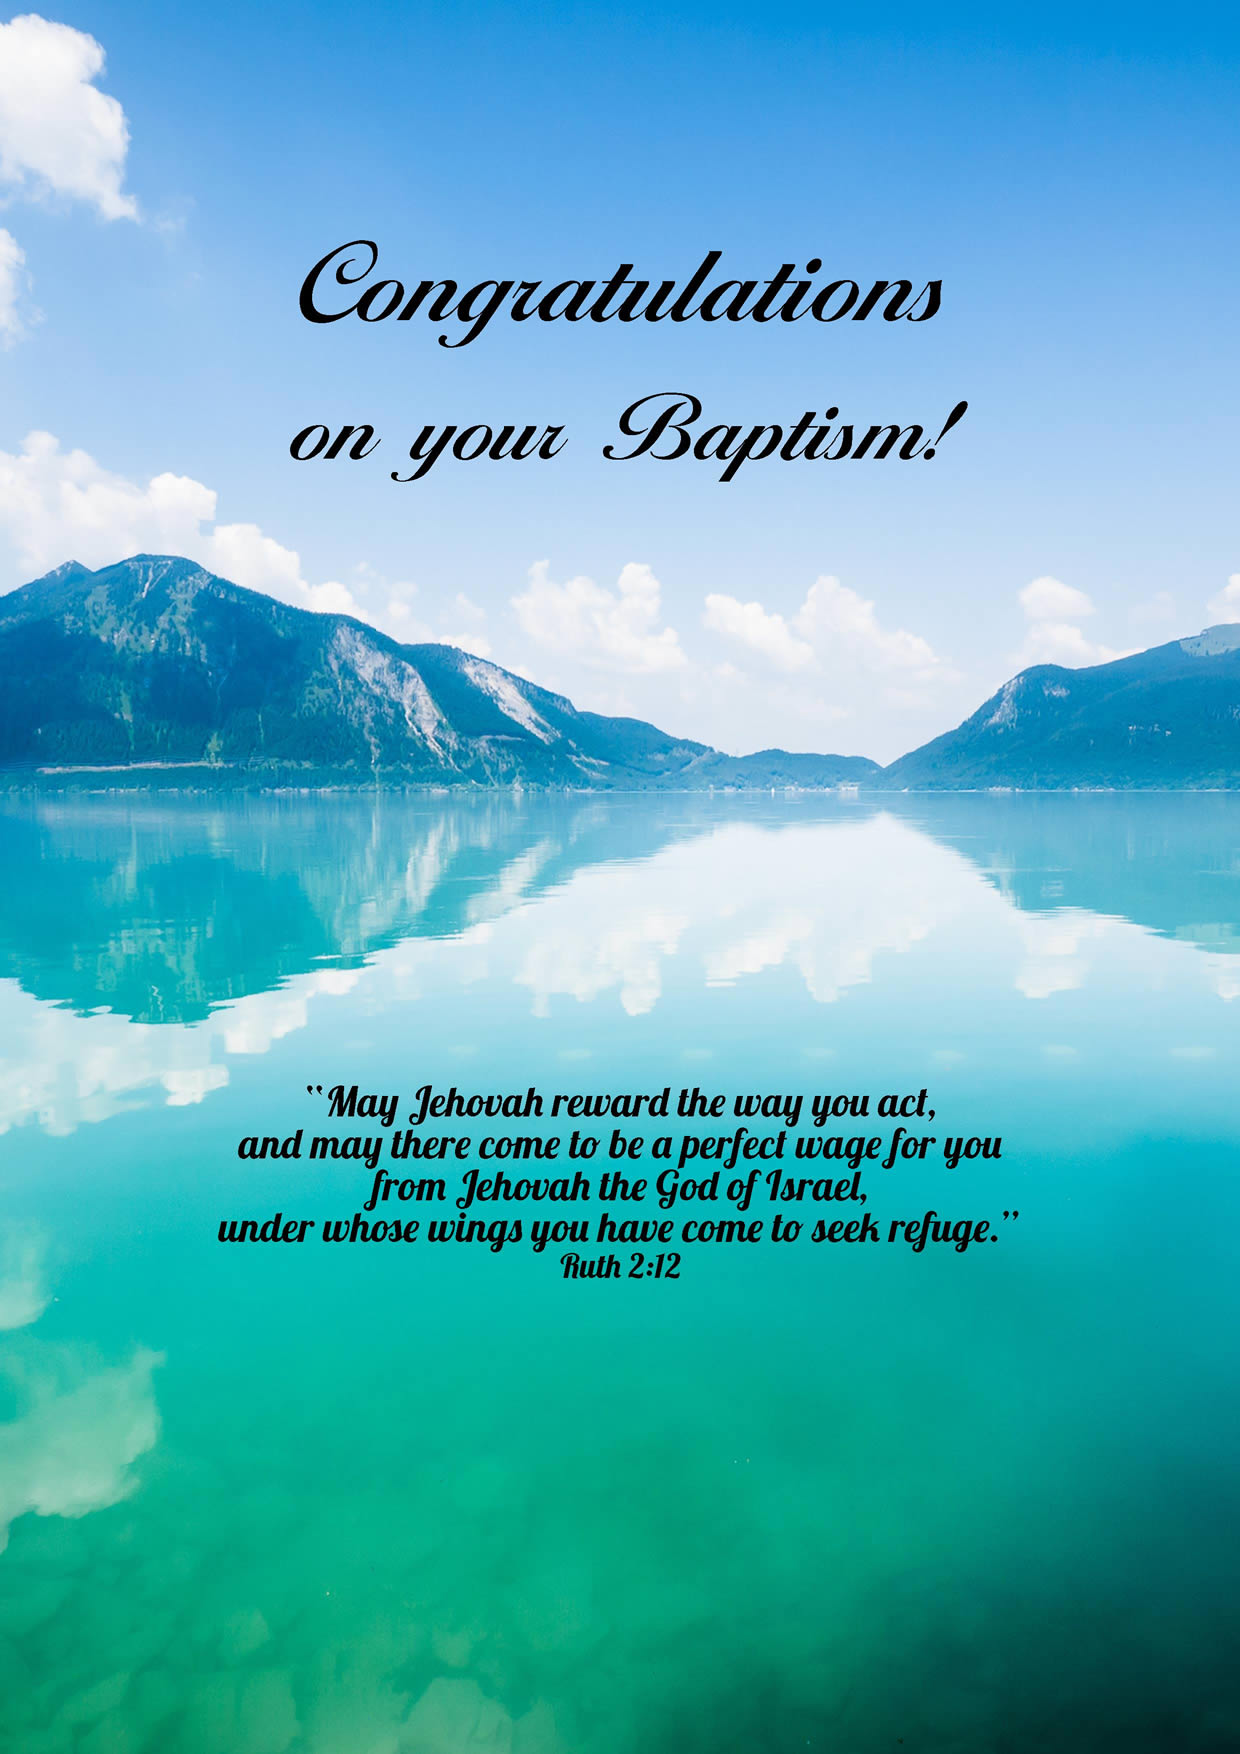 greeting-cards-baptism-jehovah-s-witness-theocratic-ministry